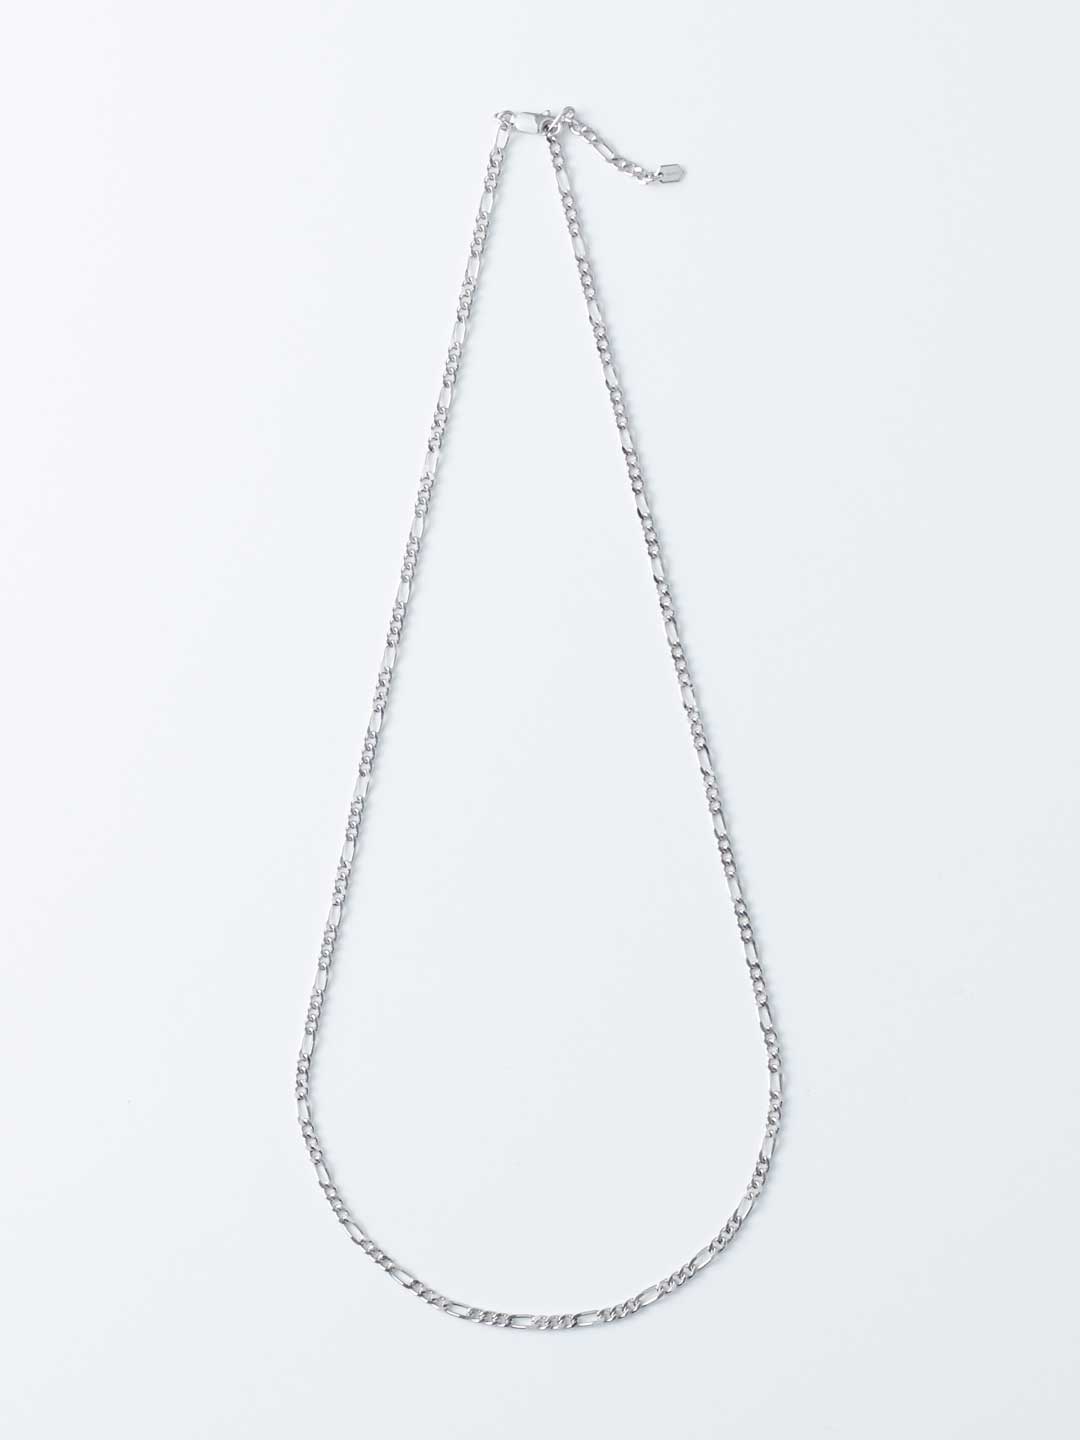 Negroni Necklace - Silver